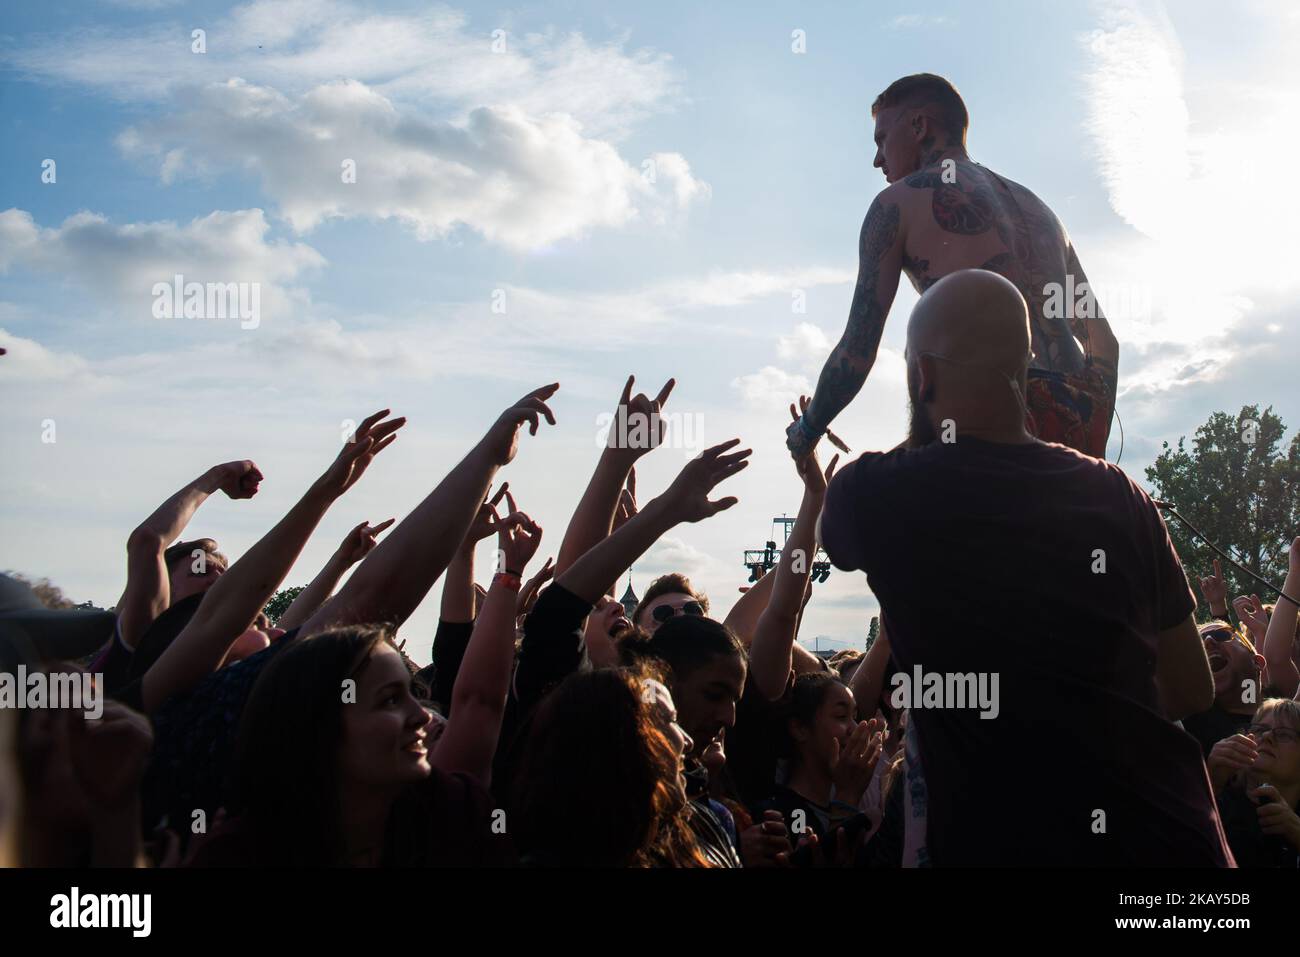 English rock band Frank Carter & The Rattlesnakes performs stage at APE Presents festival al Victoria Park, London on June 1, 2018. Frank Carter & The Rattlesnakes are an English punk rock band formed in 2015 by former Gallows and Pure Love frontman Frank Carter. (Photo by Alberto Pezzali/NurPhoto) Stock Photo